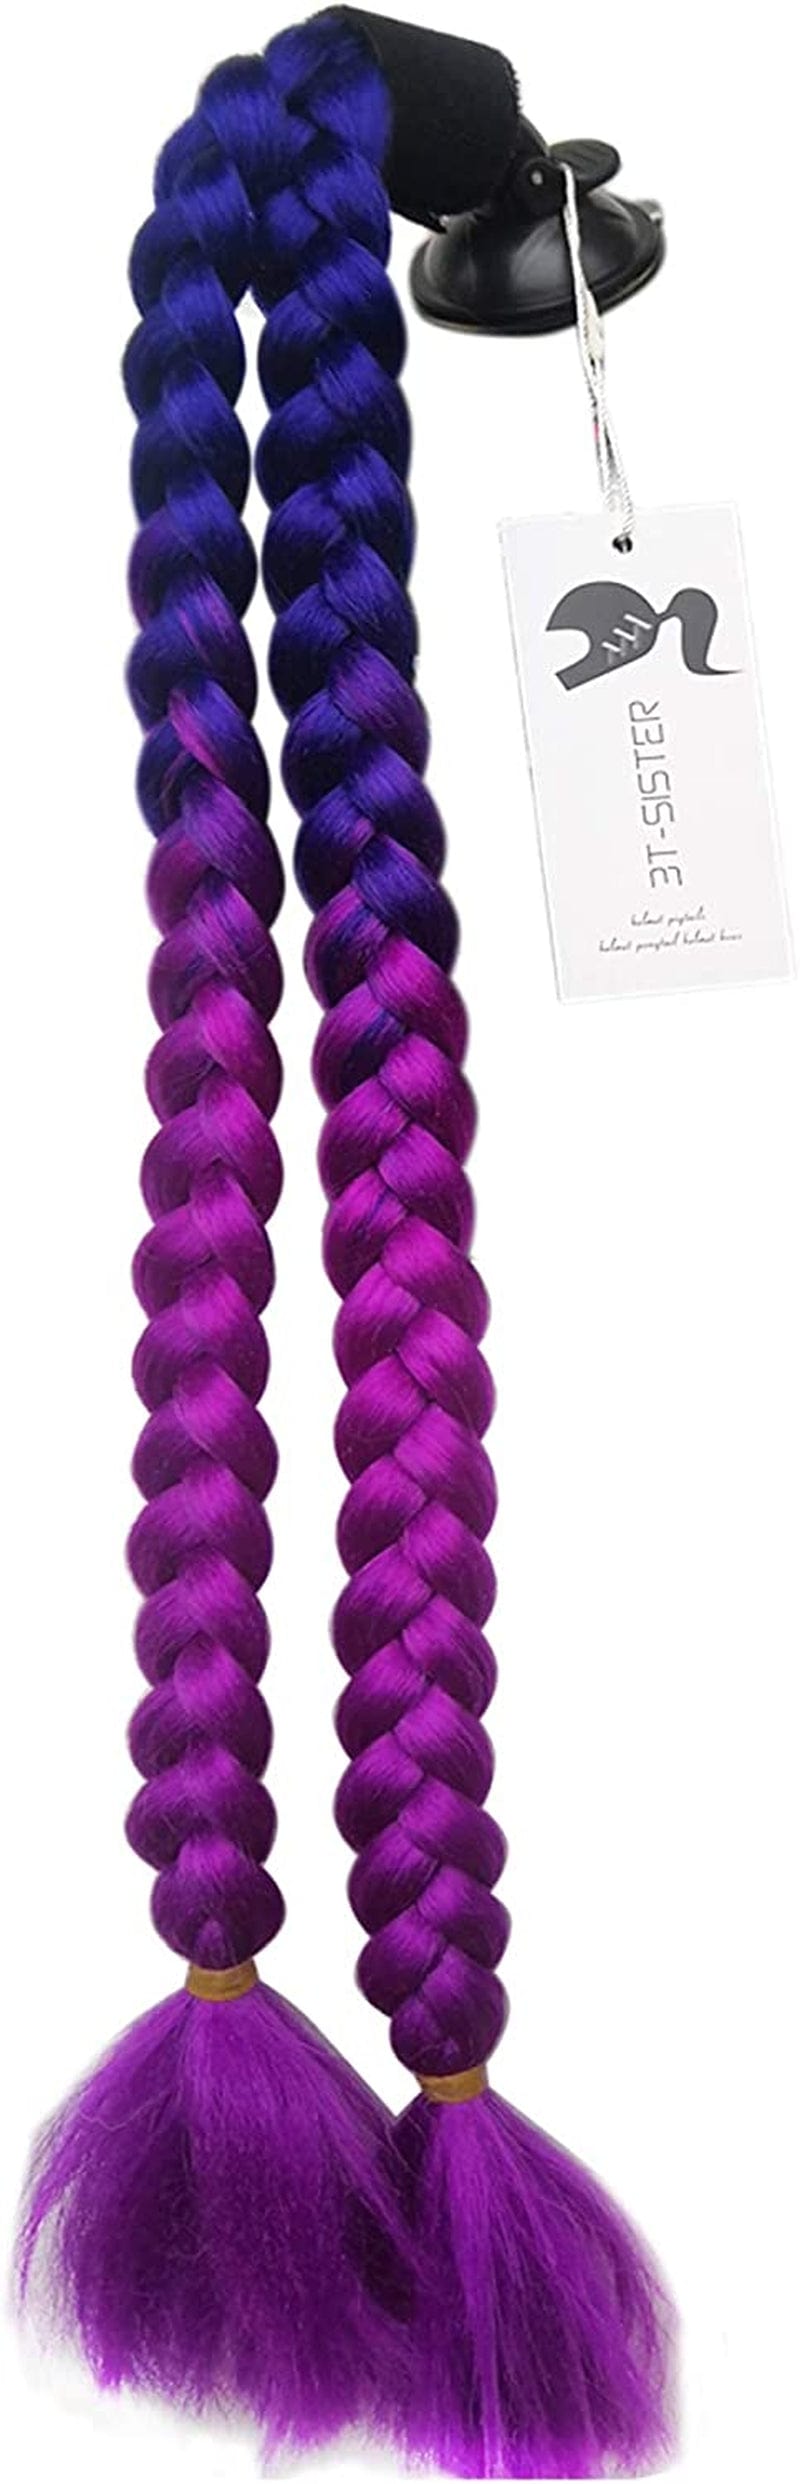 3T-SISTER Pigtails Accessory for Helmet Pigtails Ponytail Braids Hair for Motorcycle Bicycle Batting Skate Helmet or Other Helmets 2 Braids Together 24Inch /Many Colors (Helmet Not Included) Sporting Goods > Outdoor Recreation > Cycling > Cycling Apparel & Accessories > Bicycle Helmets 3T-SISTER purple  